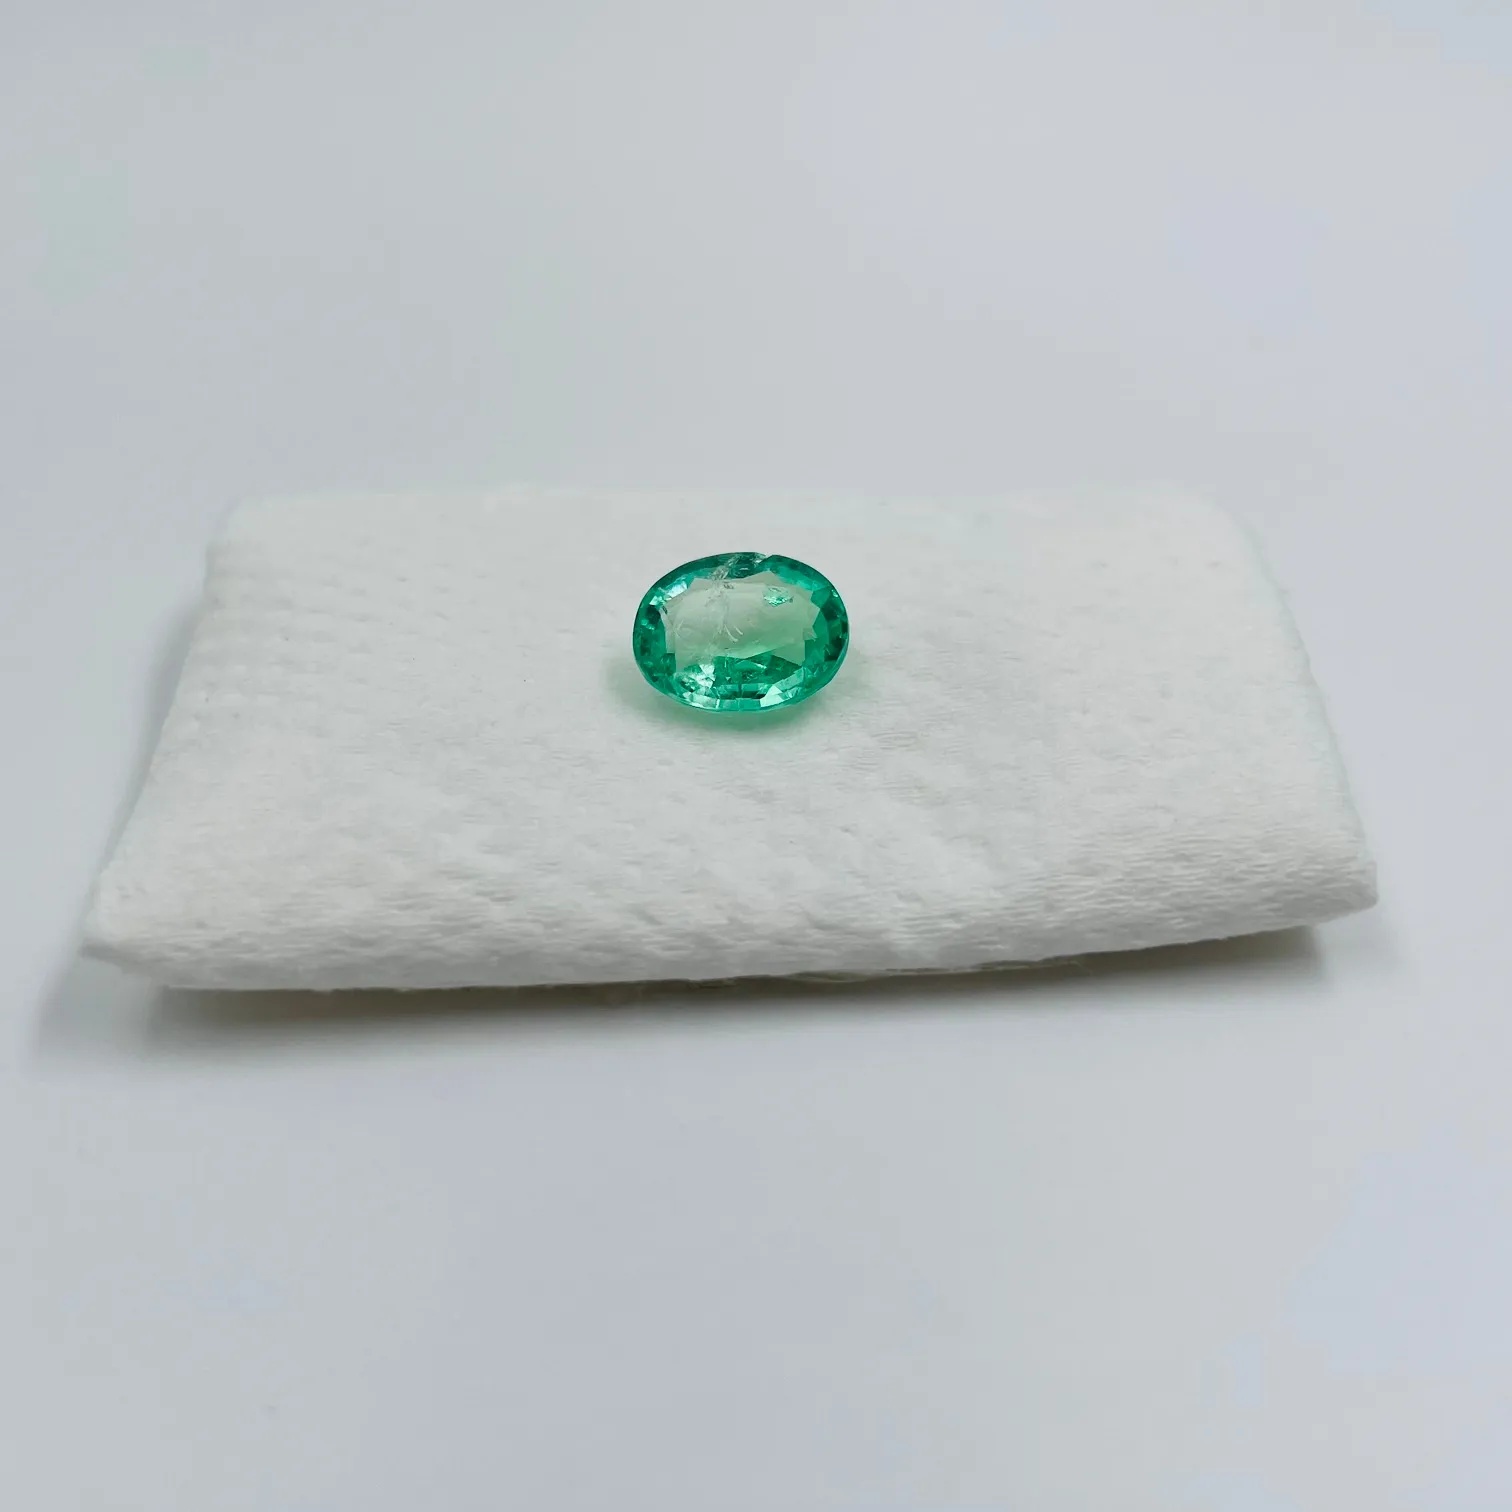 Natural Columbian Oval Emerald 2.93 carats Loose Gemstone Ring Bijoux Jewelry Non-heated Non-treated Stone